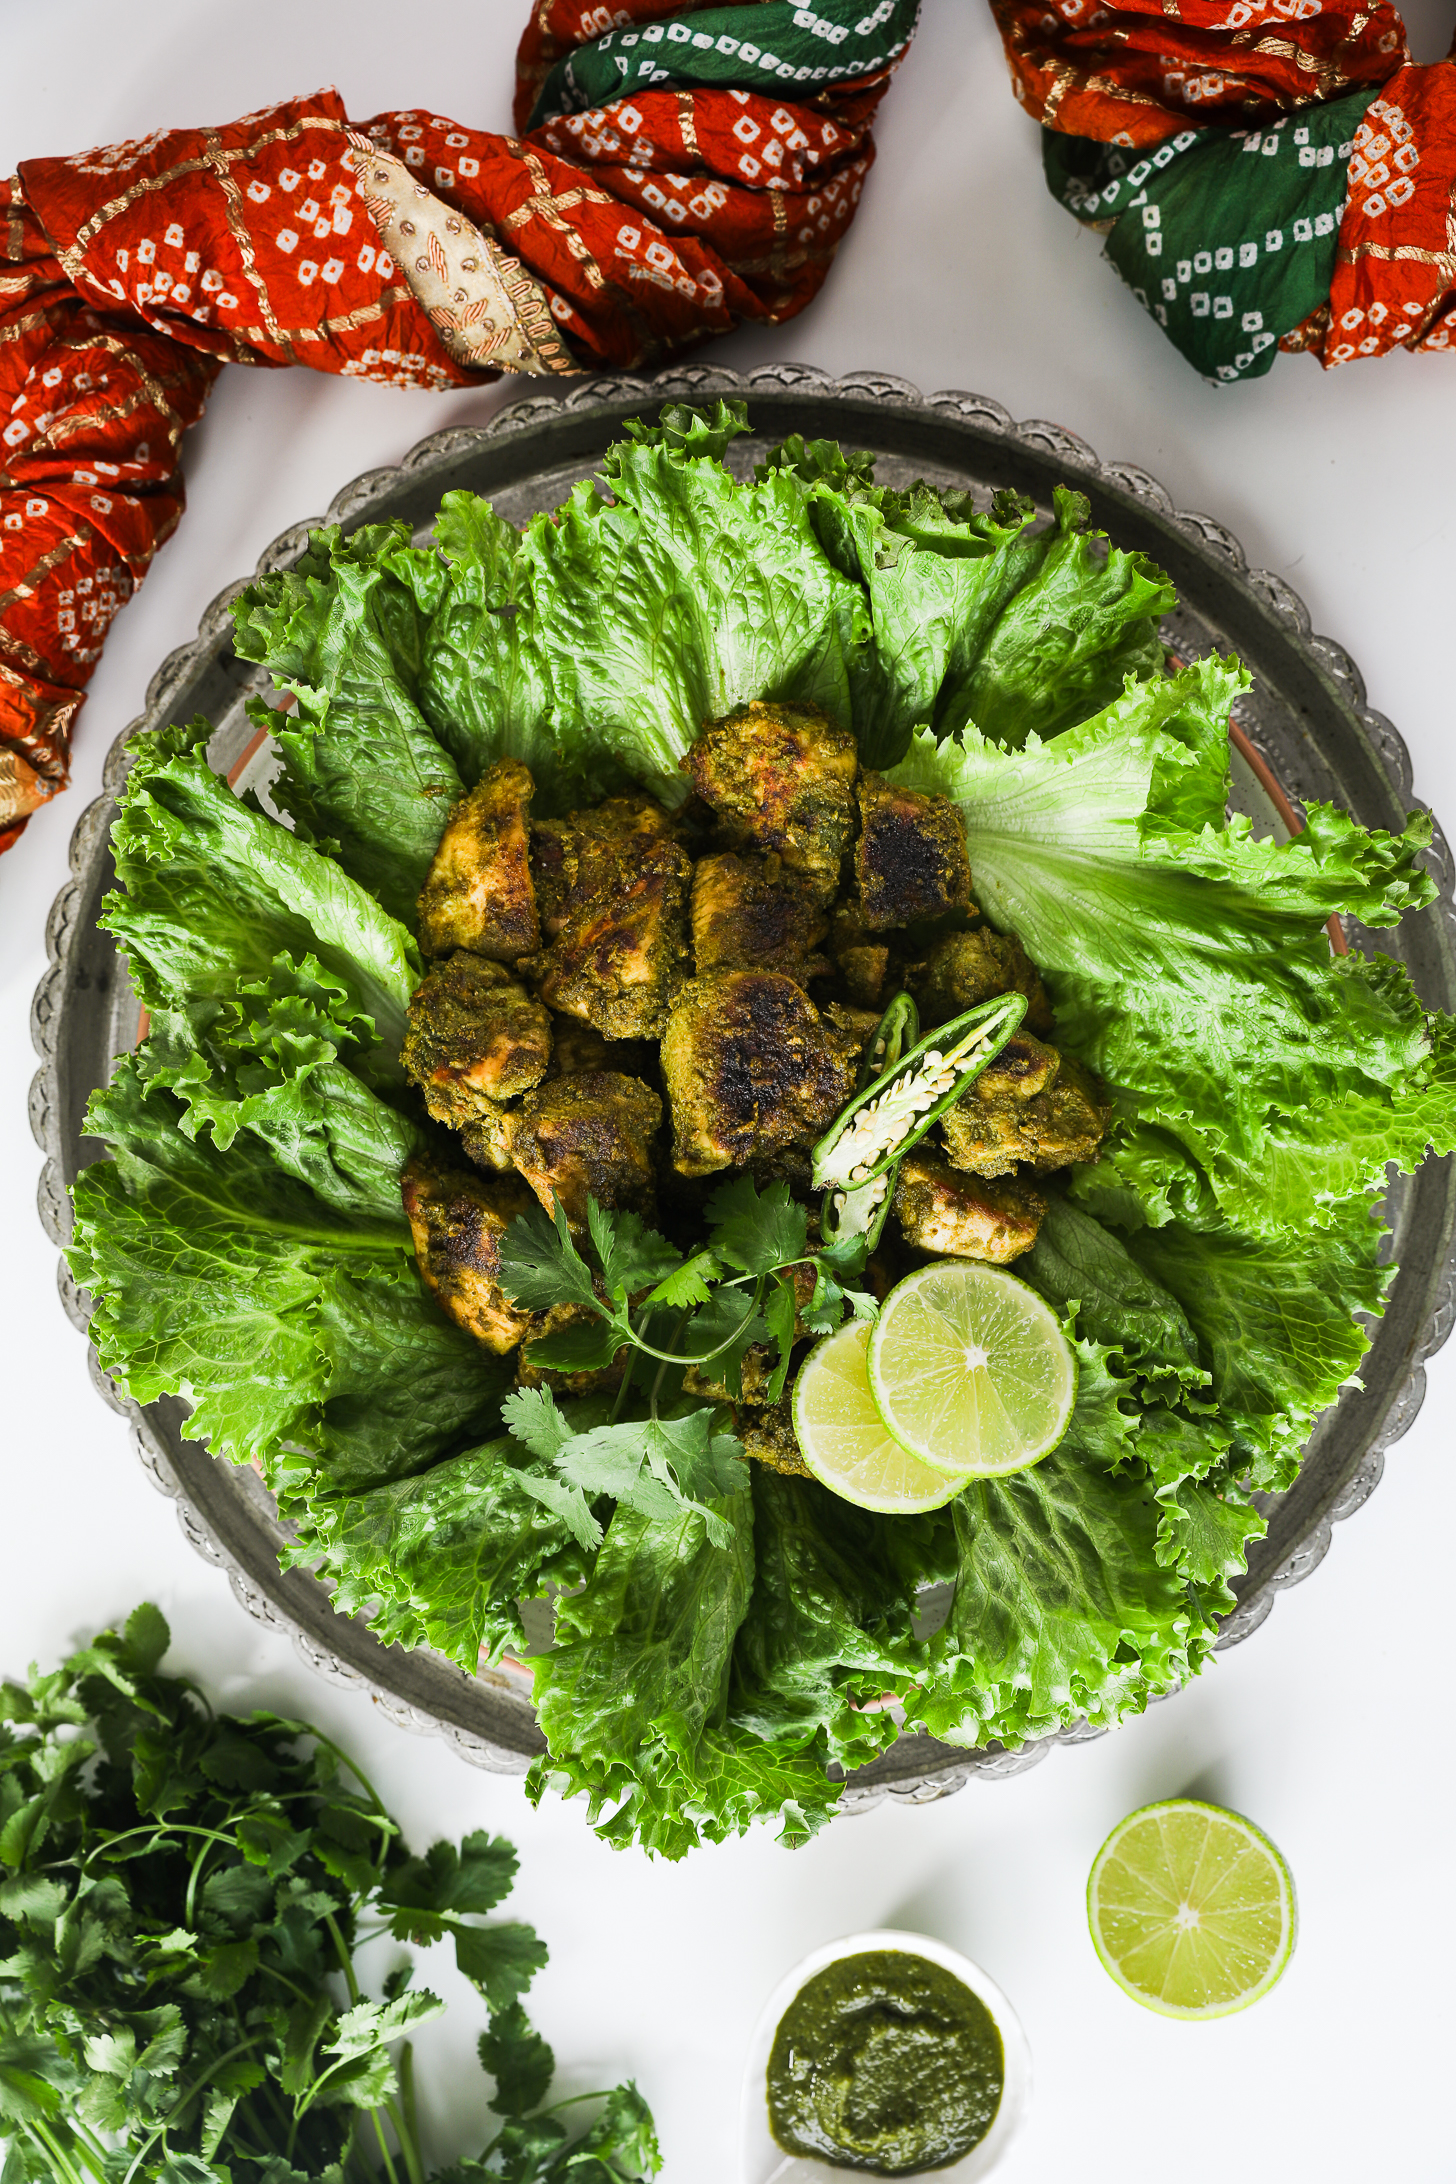 Overhead close-up image of fried green chicken breast on lettuce, adorned with chillies and lime, styled with an Indian scarf and cilantro.